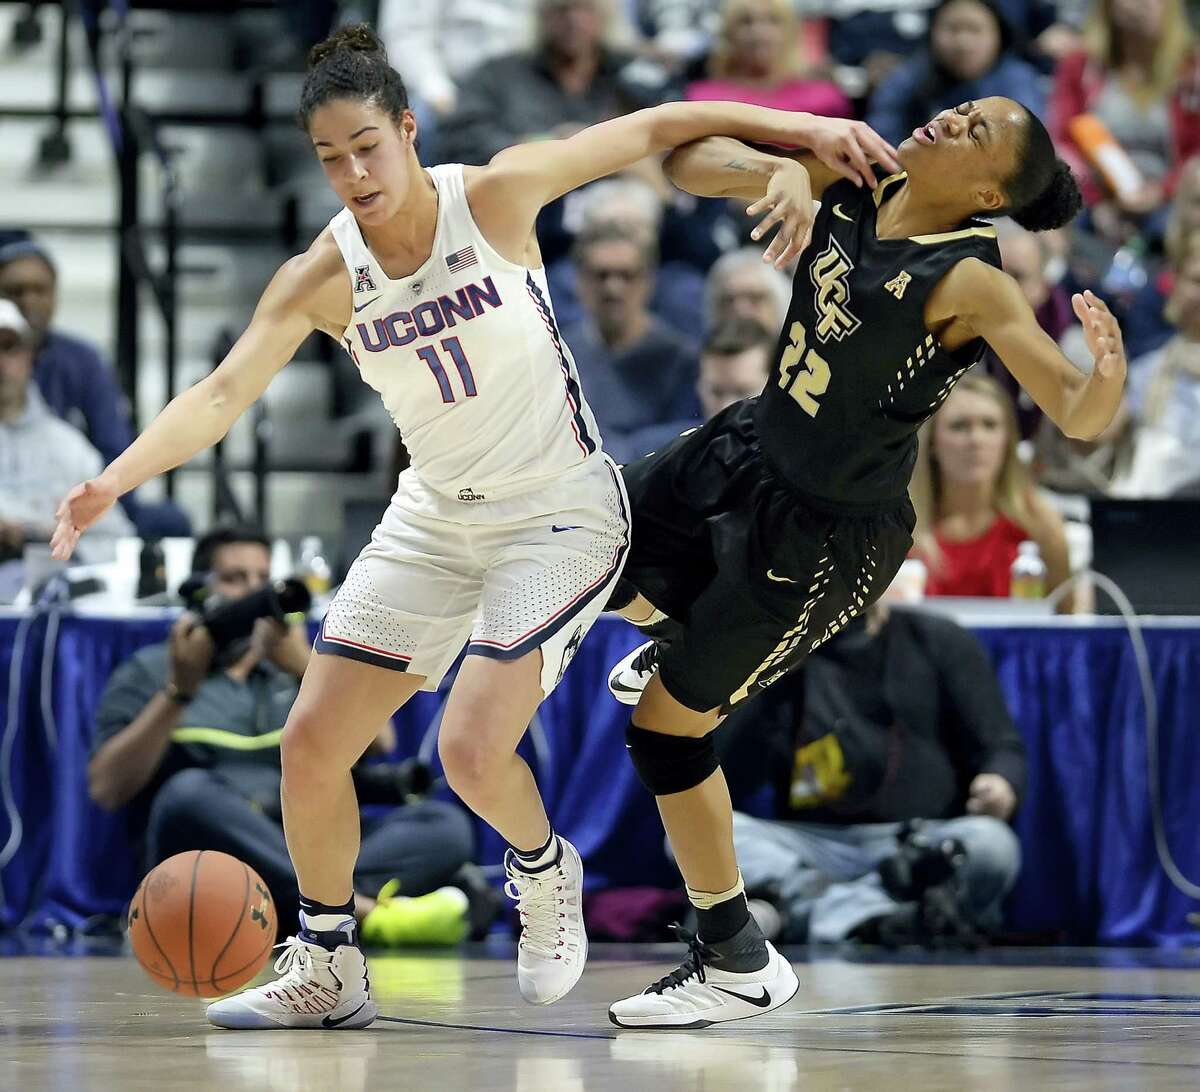 UConn’s Kia Nurse, left, and Central Florida’s Aliyah Gregory, right, battle for a loose ball during the first half Sunday in an AAC semifinal at Mohegan Sun Arena in Uncasville.